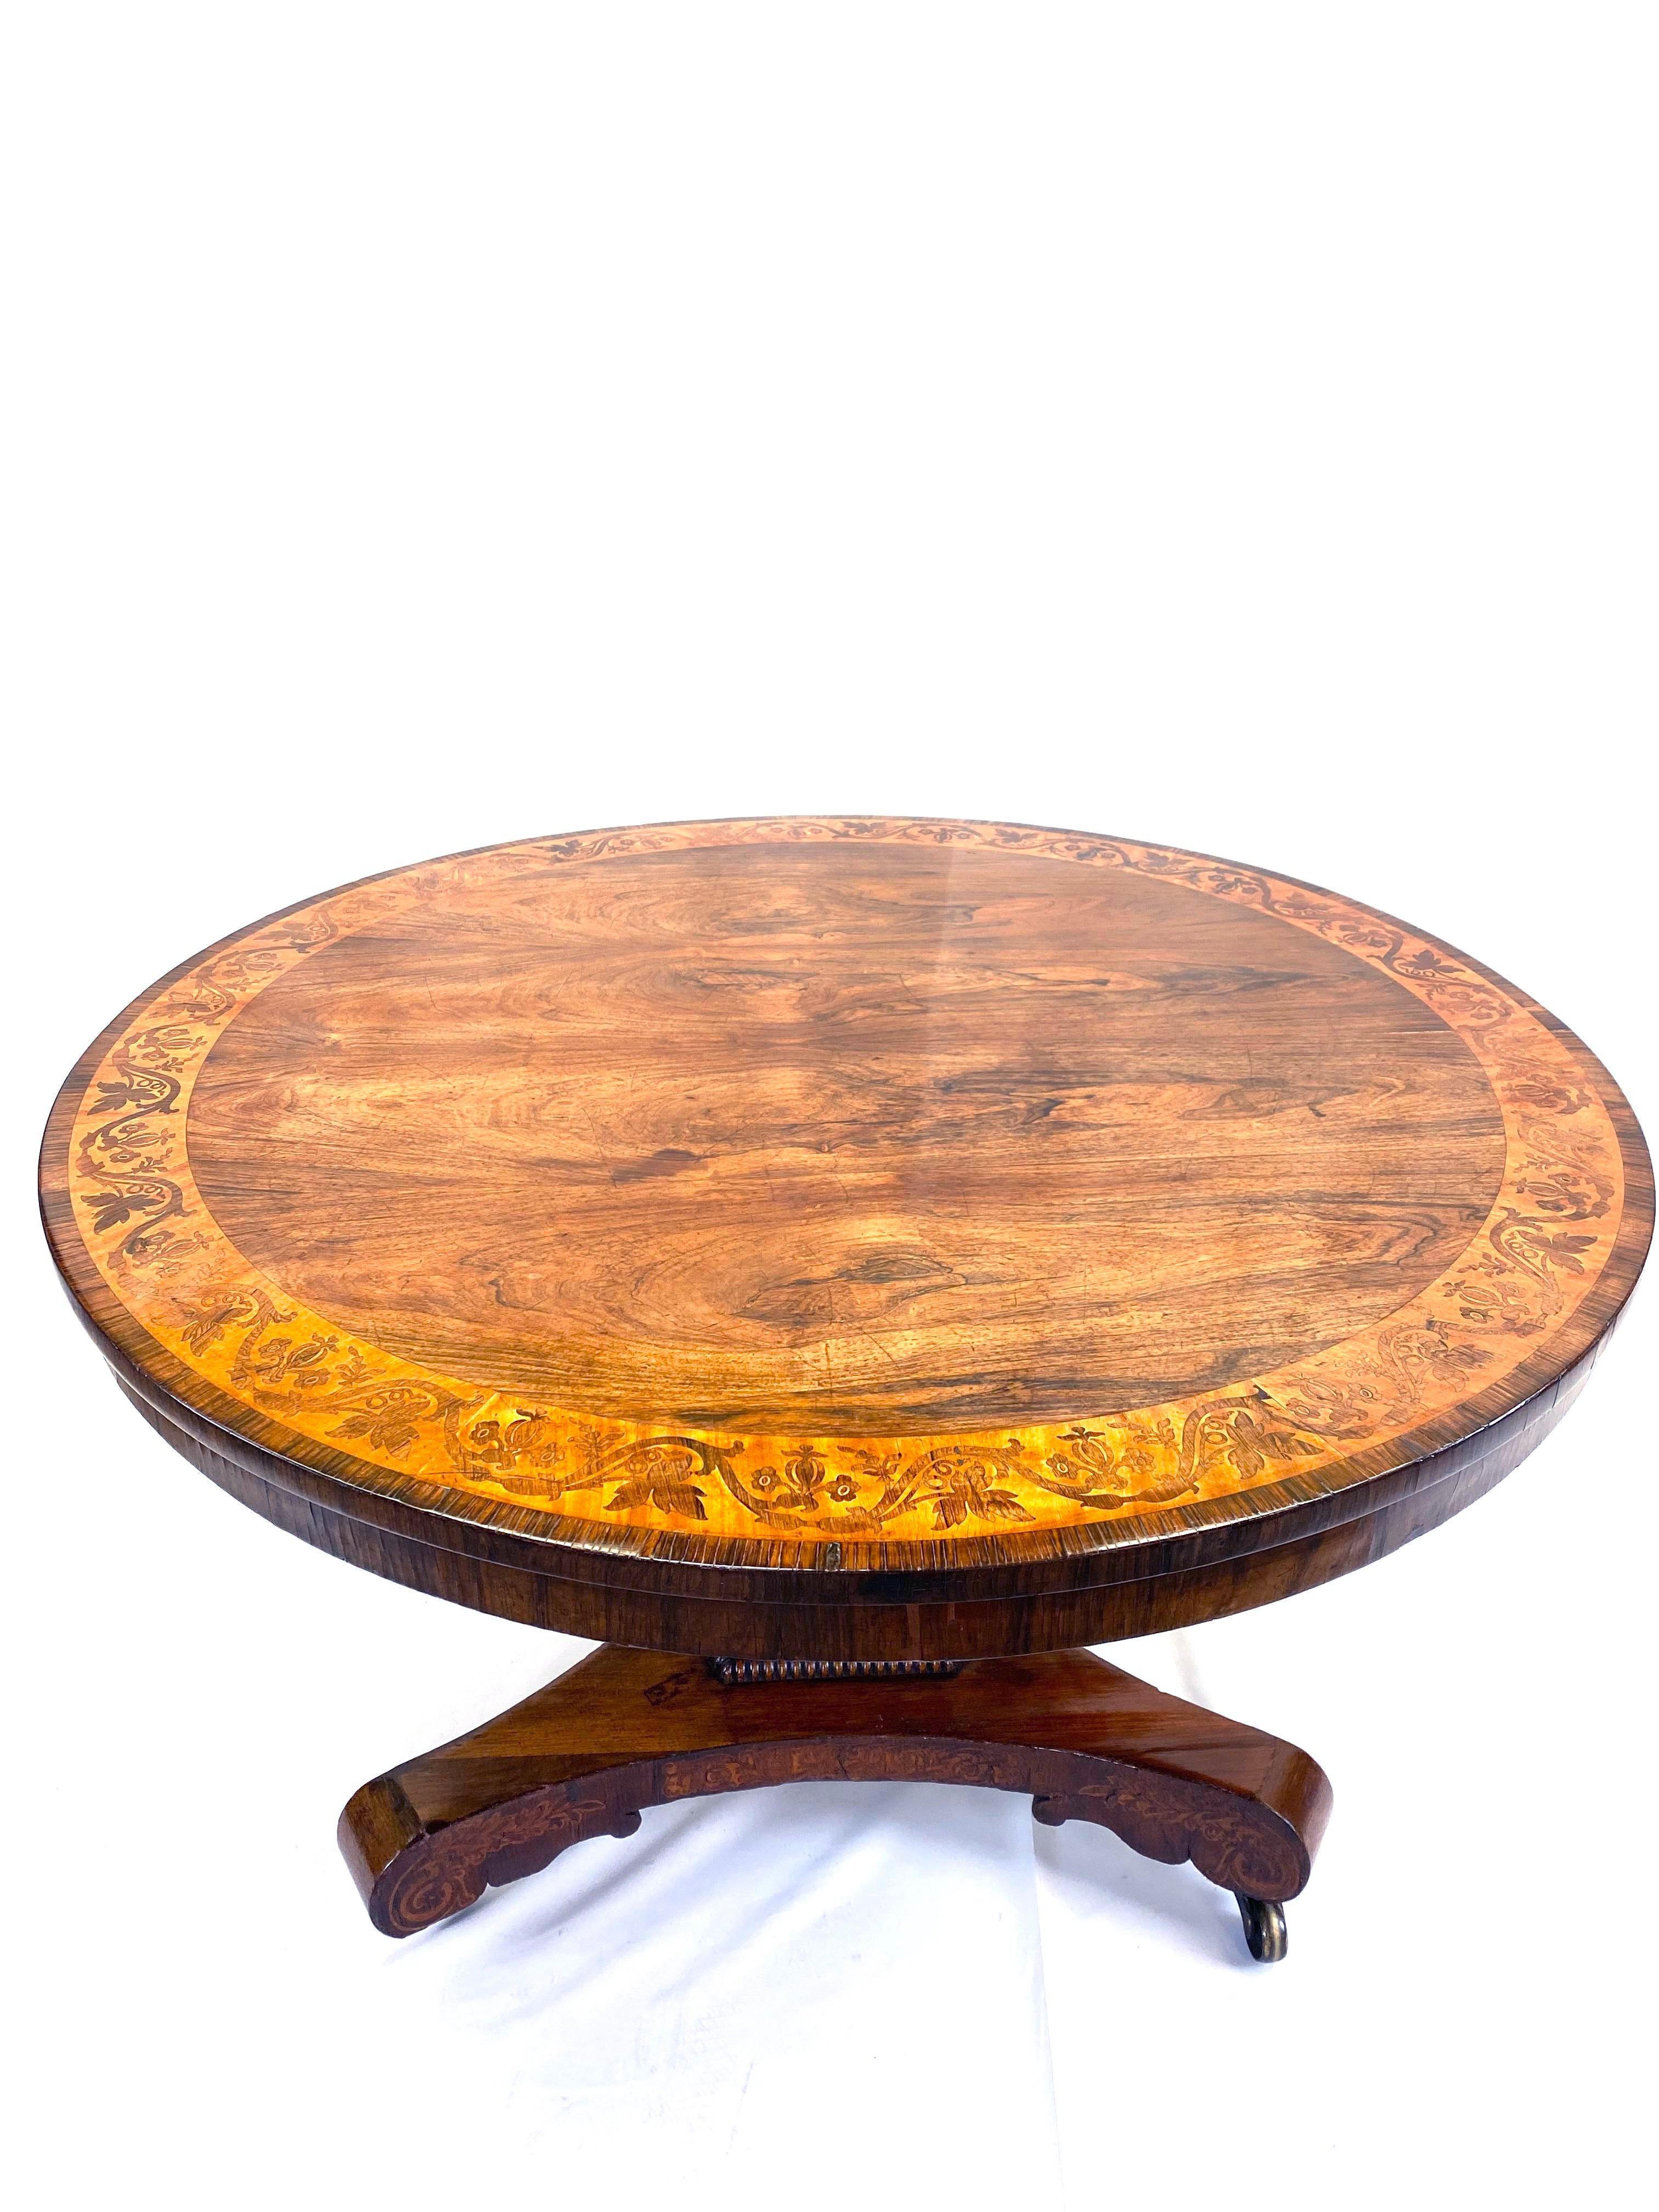 Gorgeous English Regency period tilt-top breakfast table with rosewood marquetry inlay banding. We recently French polished this table. It is in excellent condition with original hardware.
  